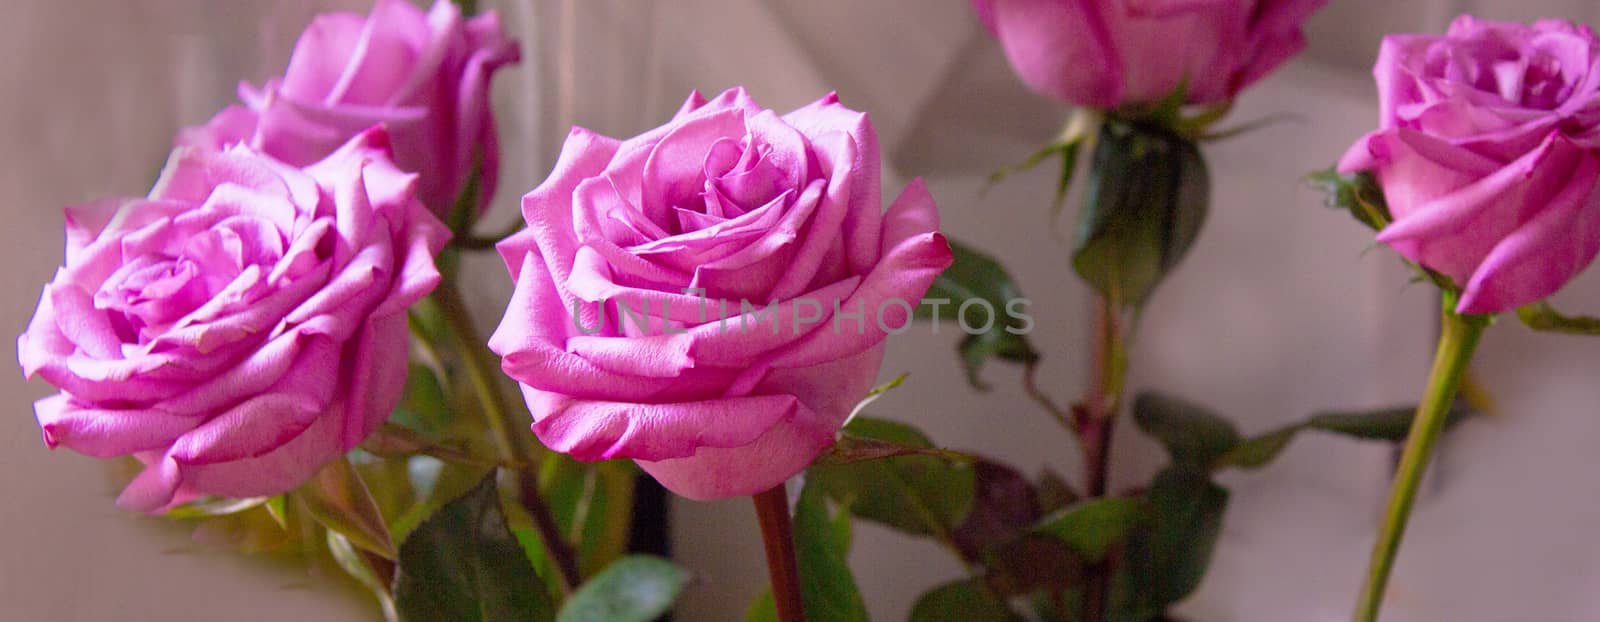 Lilac rose on black background by GemaIbarra